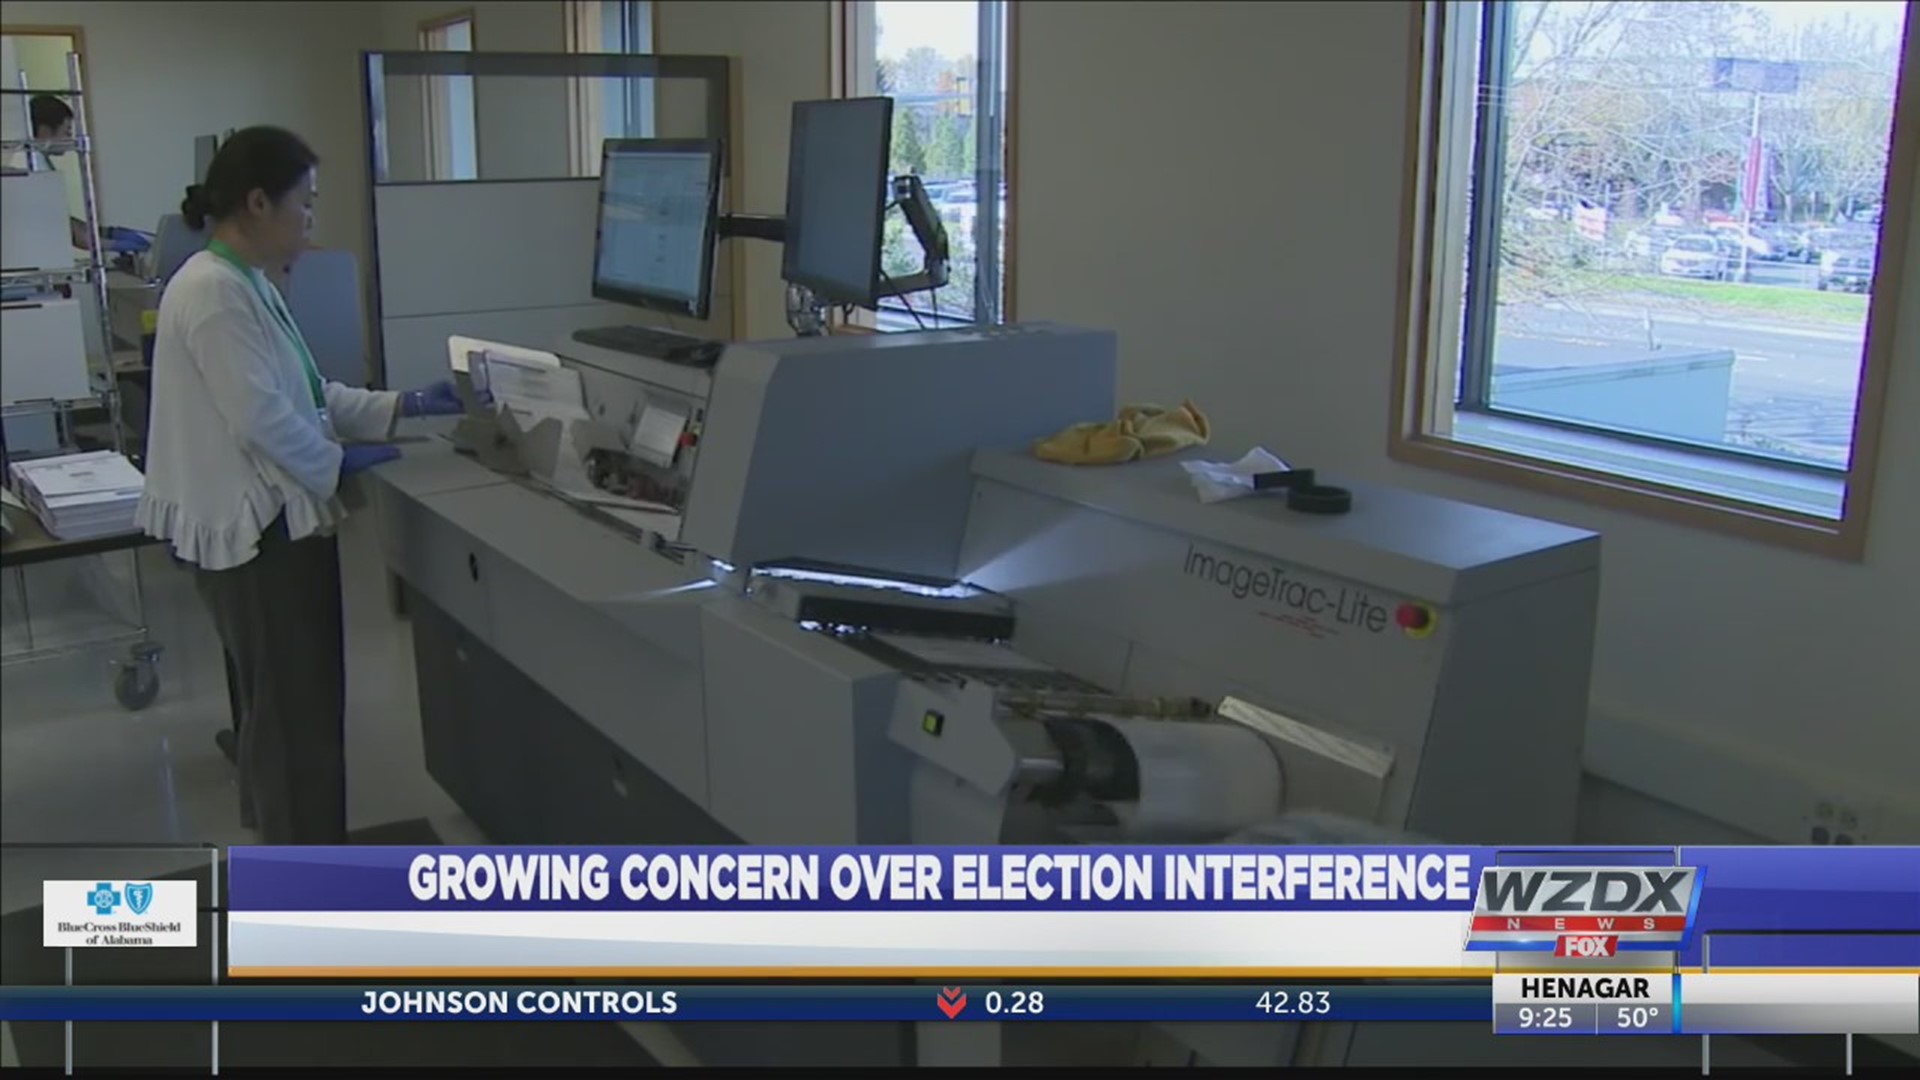 With less than a year to go until the 2020 election, there are growing concerns about cyber-attacks on our voting system.